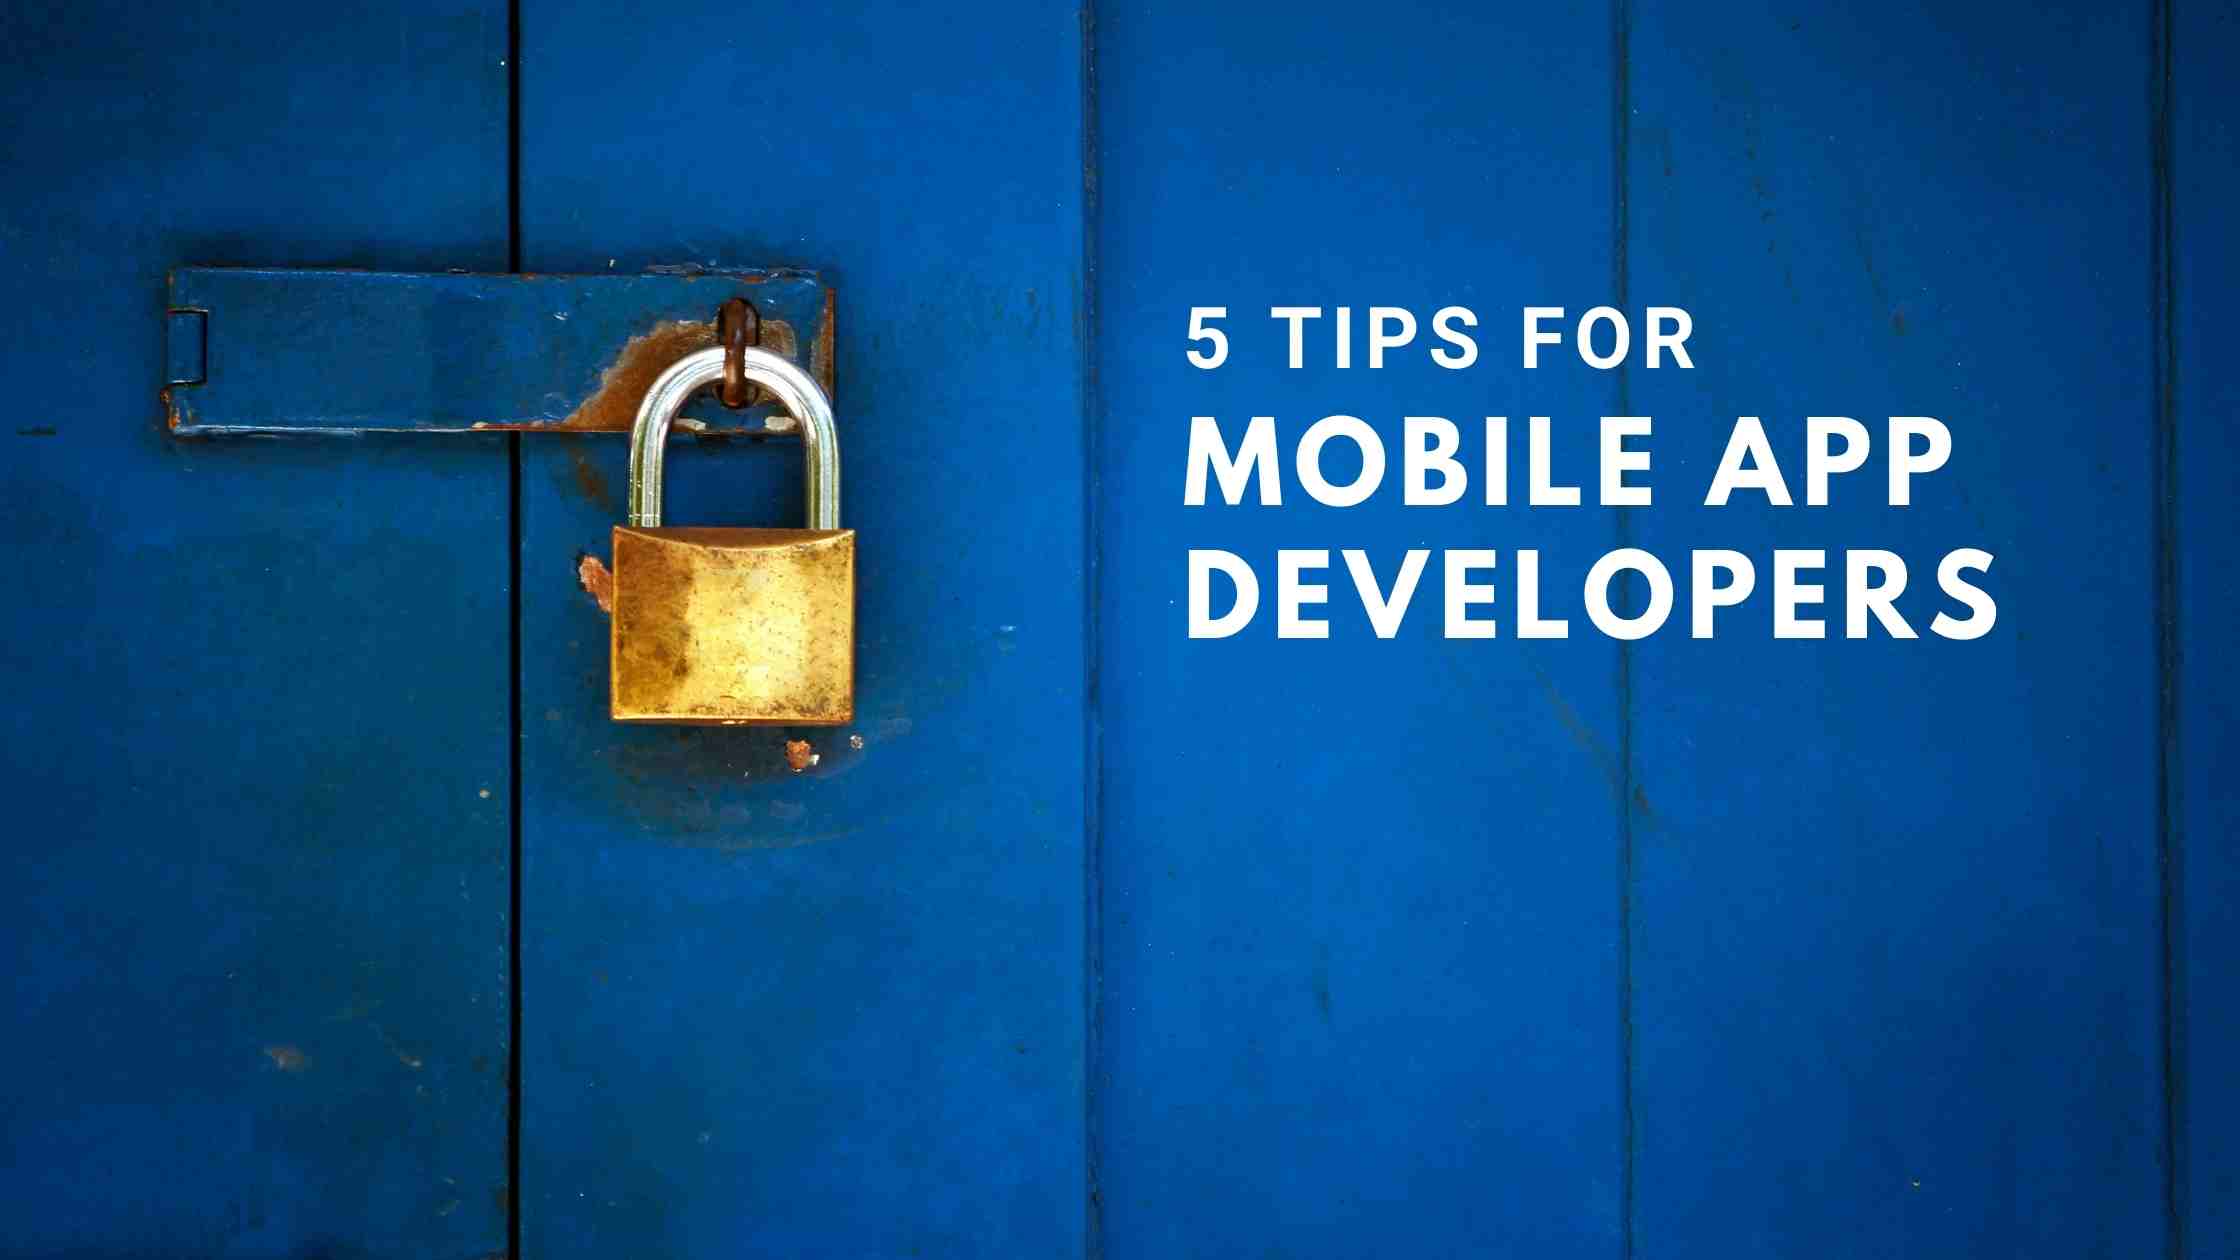 Security concept; Padlock on blue garage door with text 5 Tips for Mobile App Developers